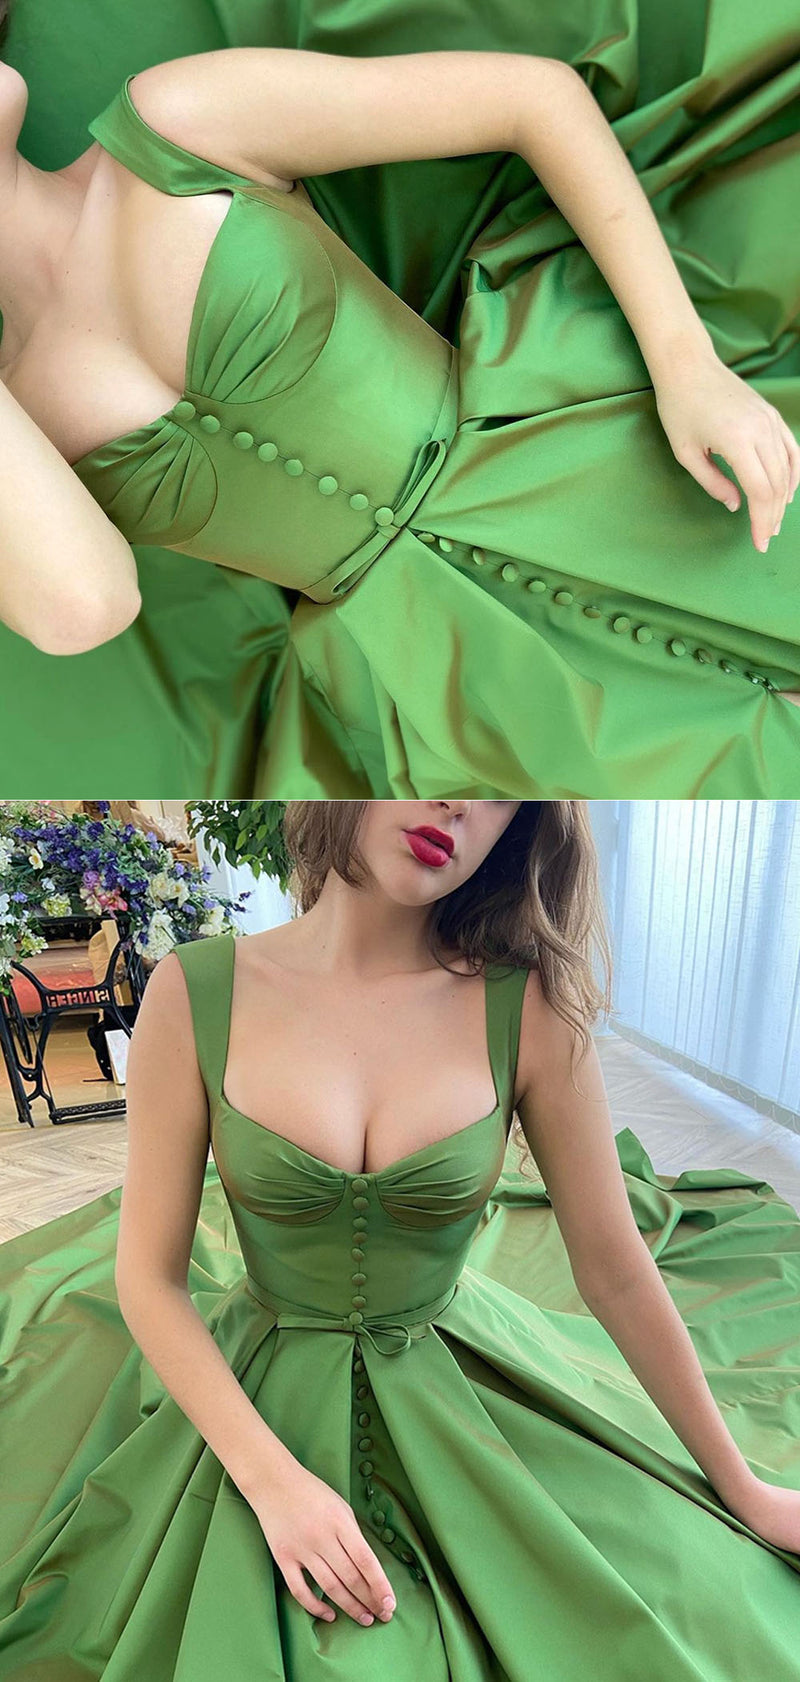 Siaoryne Amazing  Apple green Satin Prom Dress ,Buttons Bustier A-Line grad Party Dresses PL10704